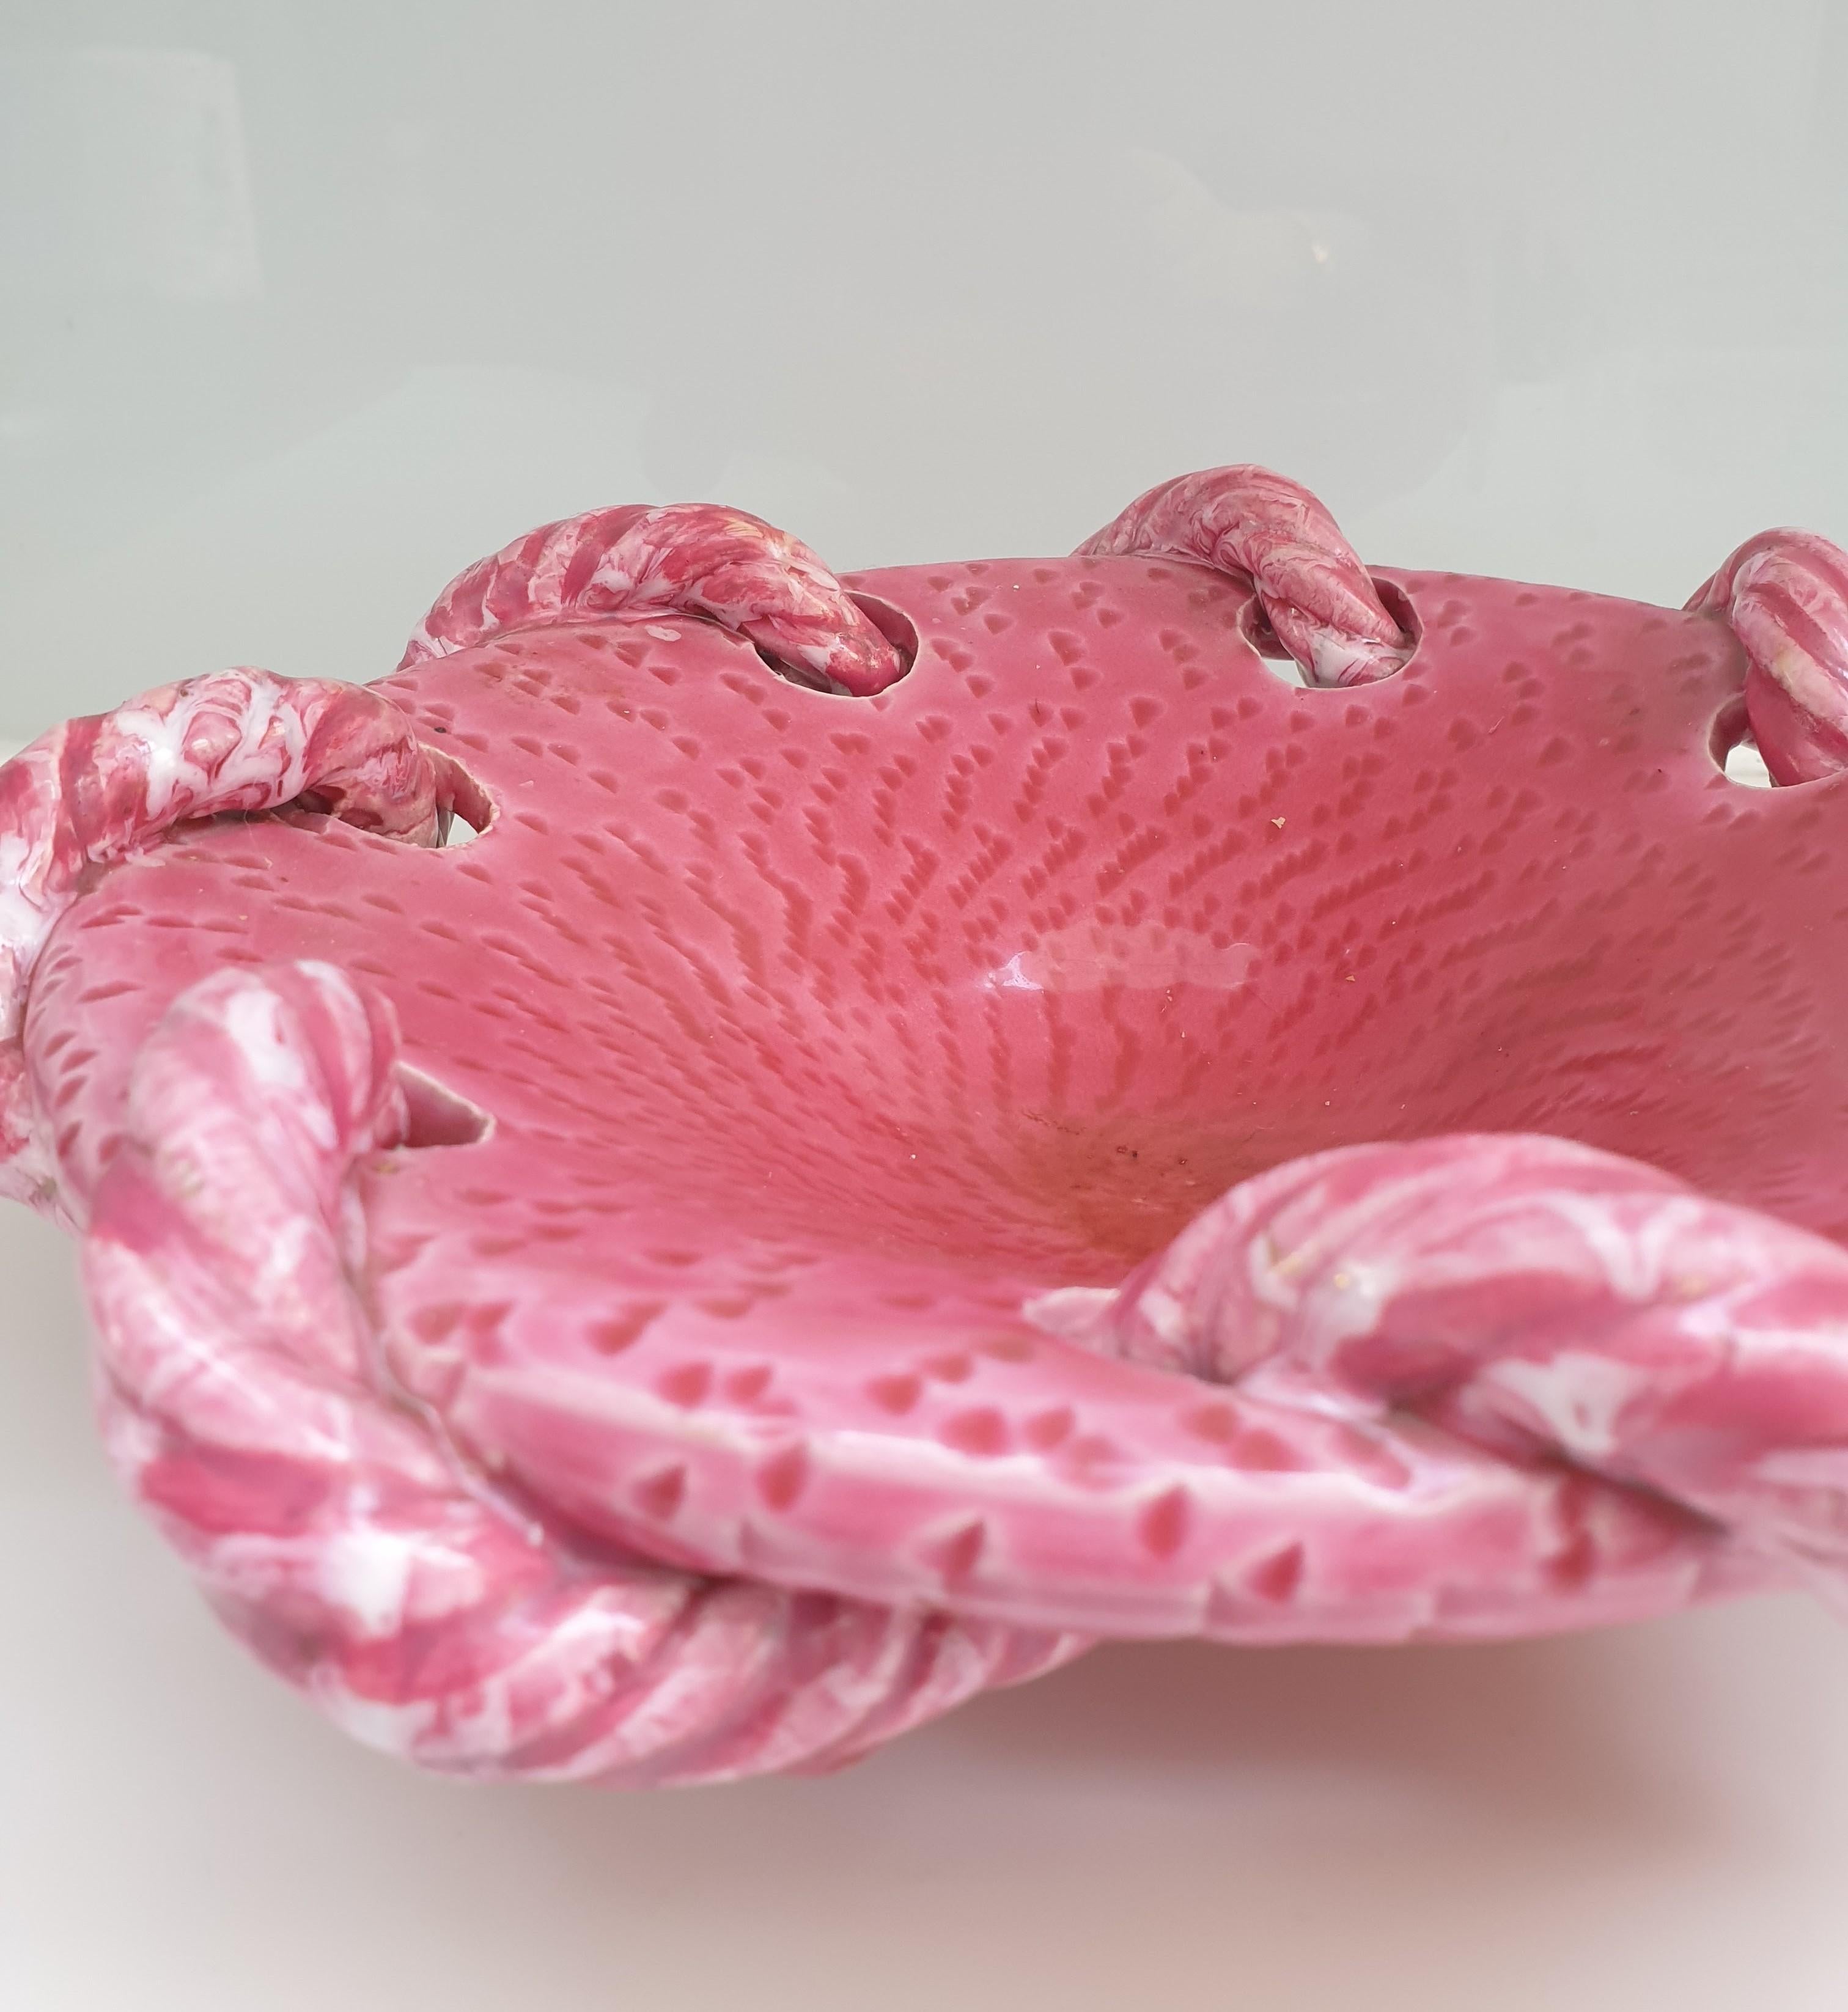 Unusual glazed vintage ceramic bowl created in the famous potteries of Vallauris in the South of France. This rope design is a classic motif made famous in this area but the colour, a beautiful rose pink, is quite rare. These potteries were at their